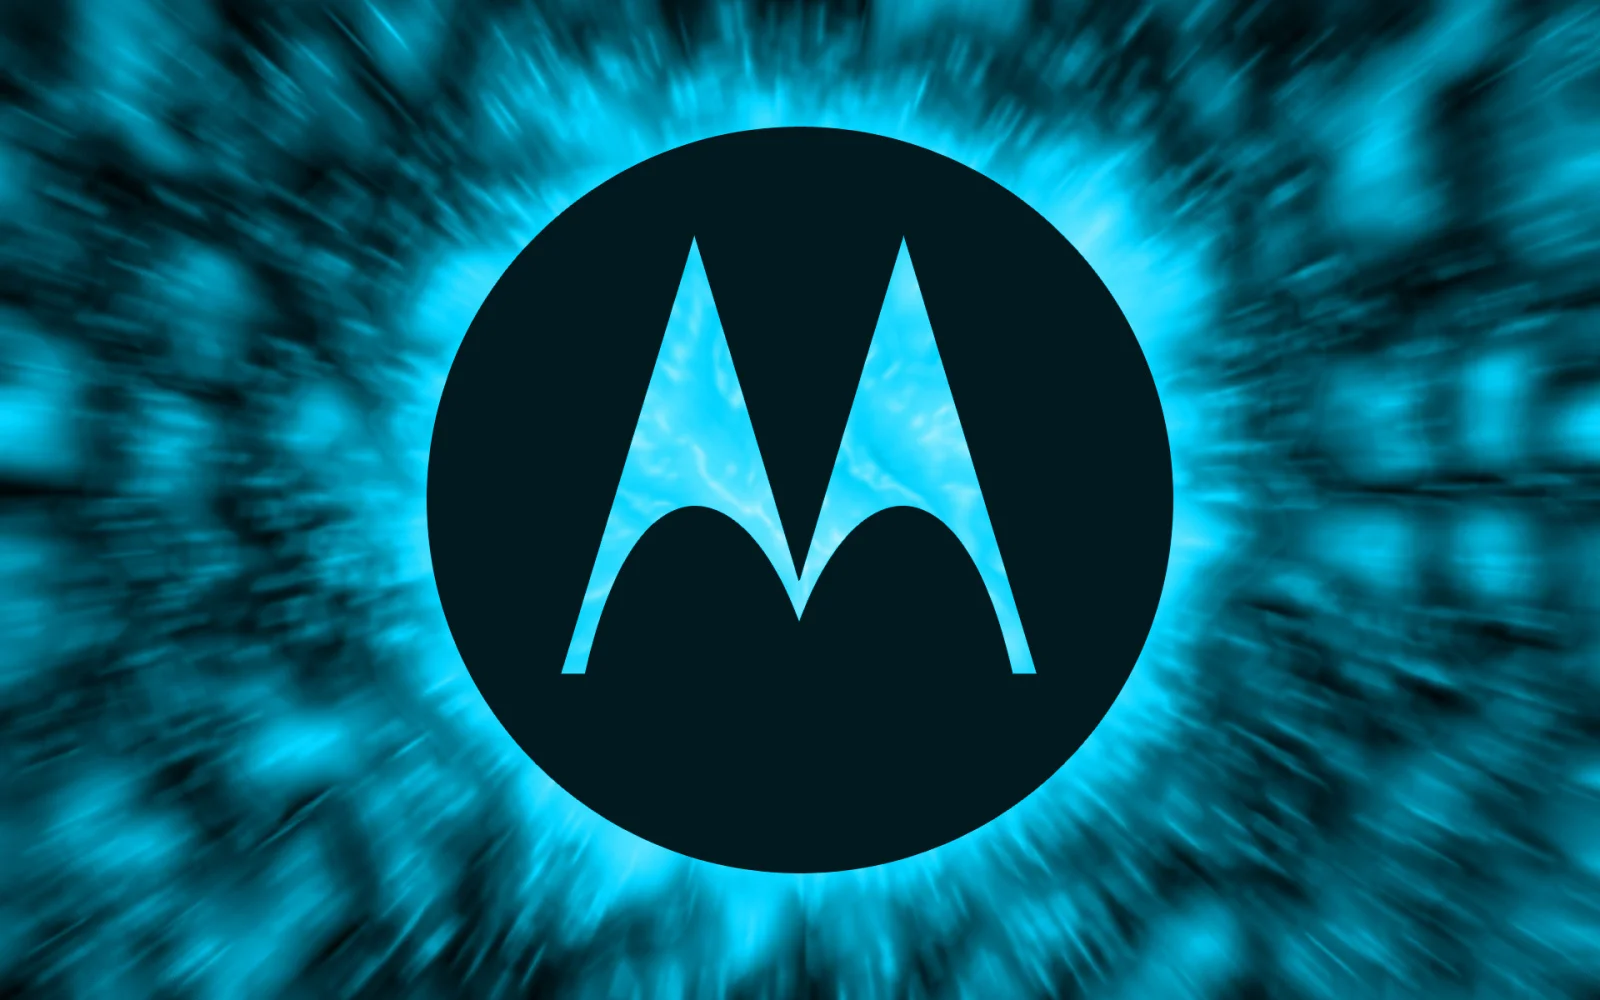 Moto G Power design revealed before official announcement